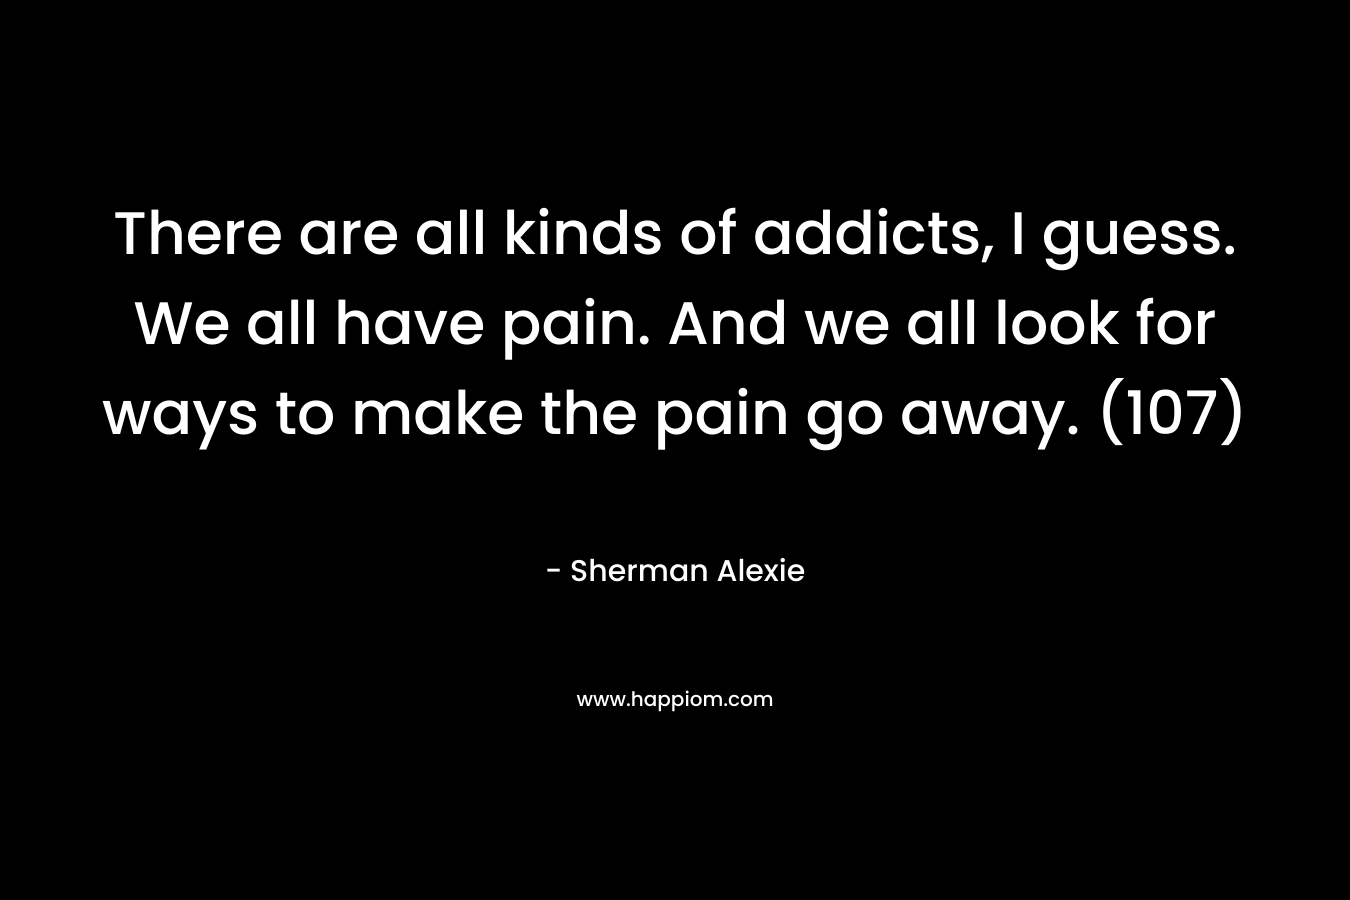 There are all kinds of addicts, I guess. We all have pain. And we all look for ways to make the pain go away. (107)